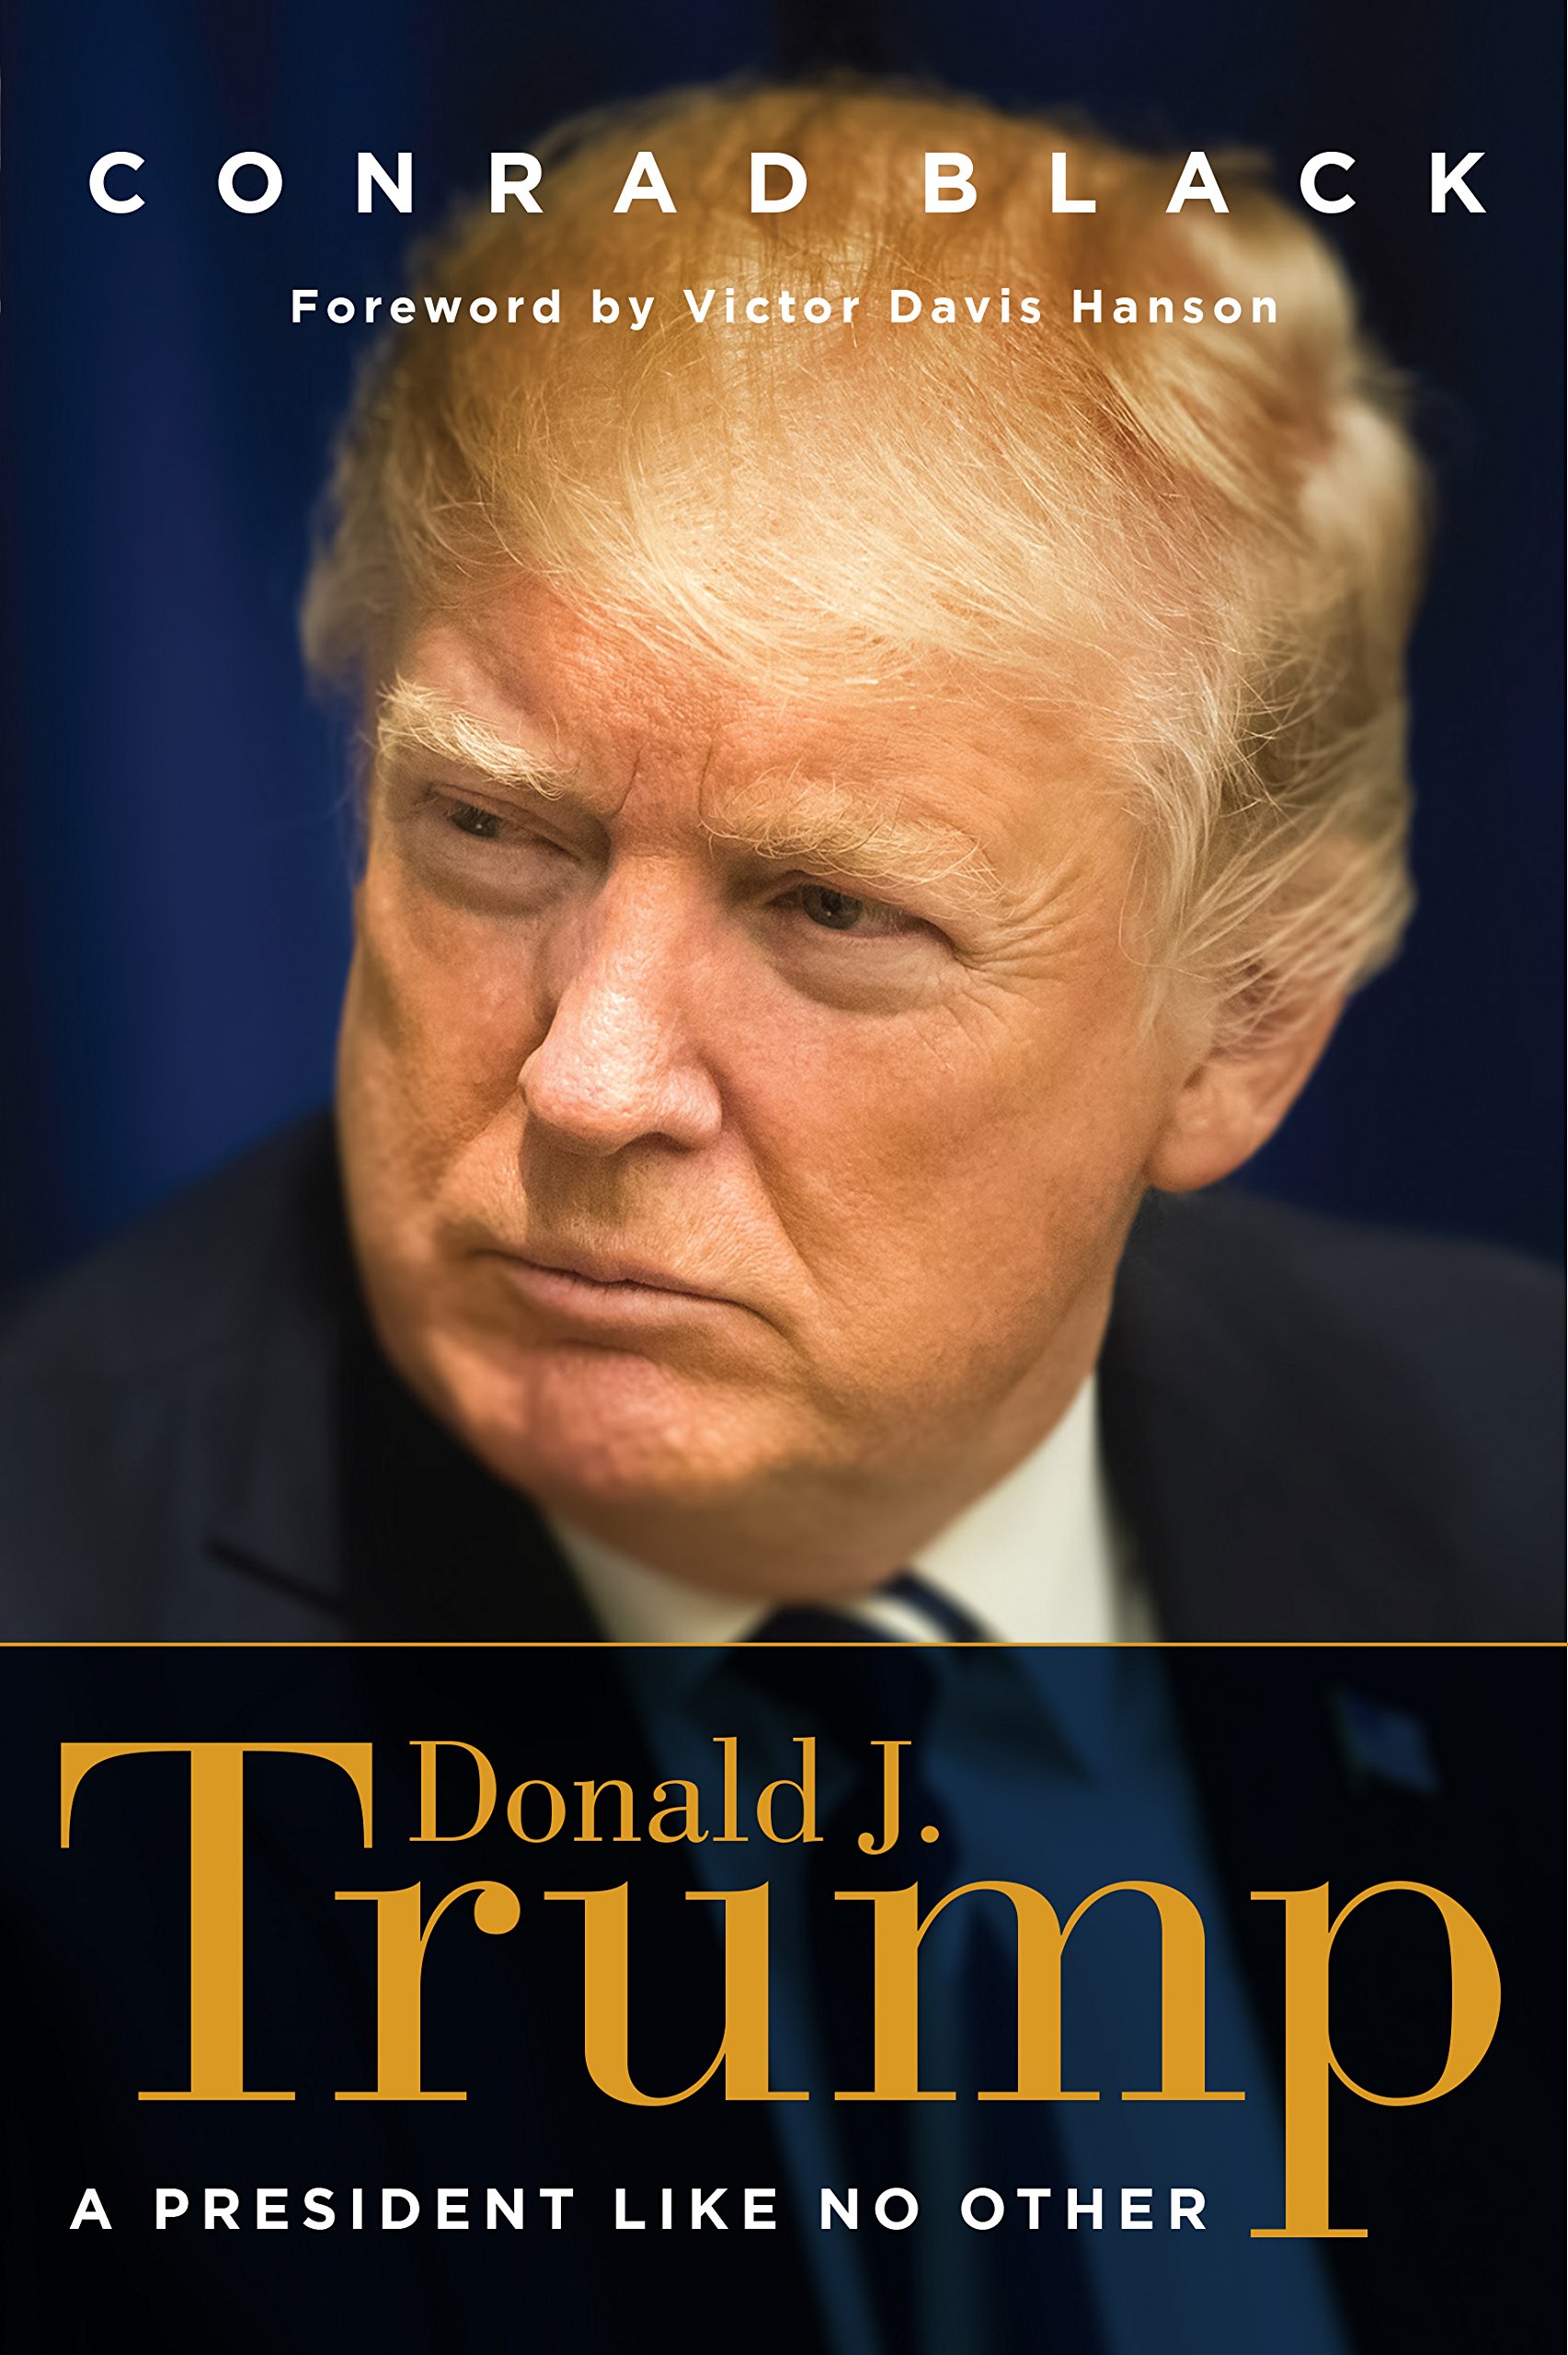 Donald J. Trump: A President Like No Other | Conservative Book Club